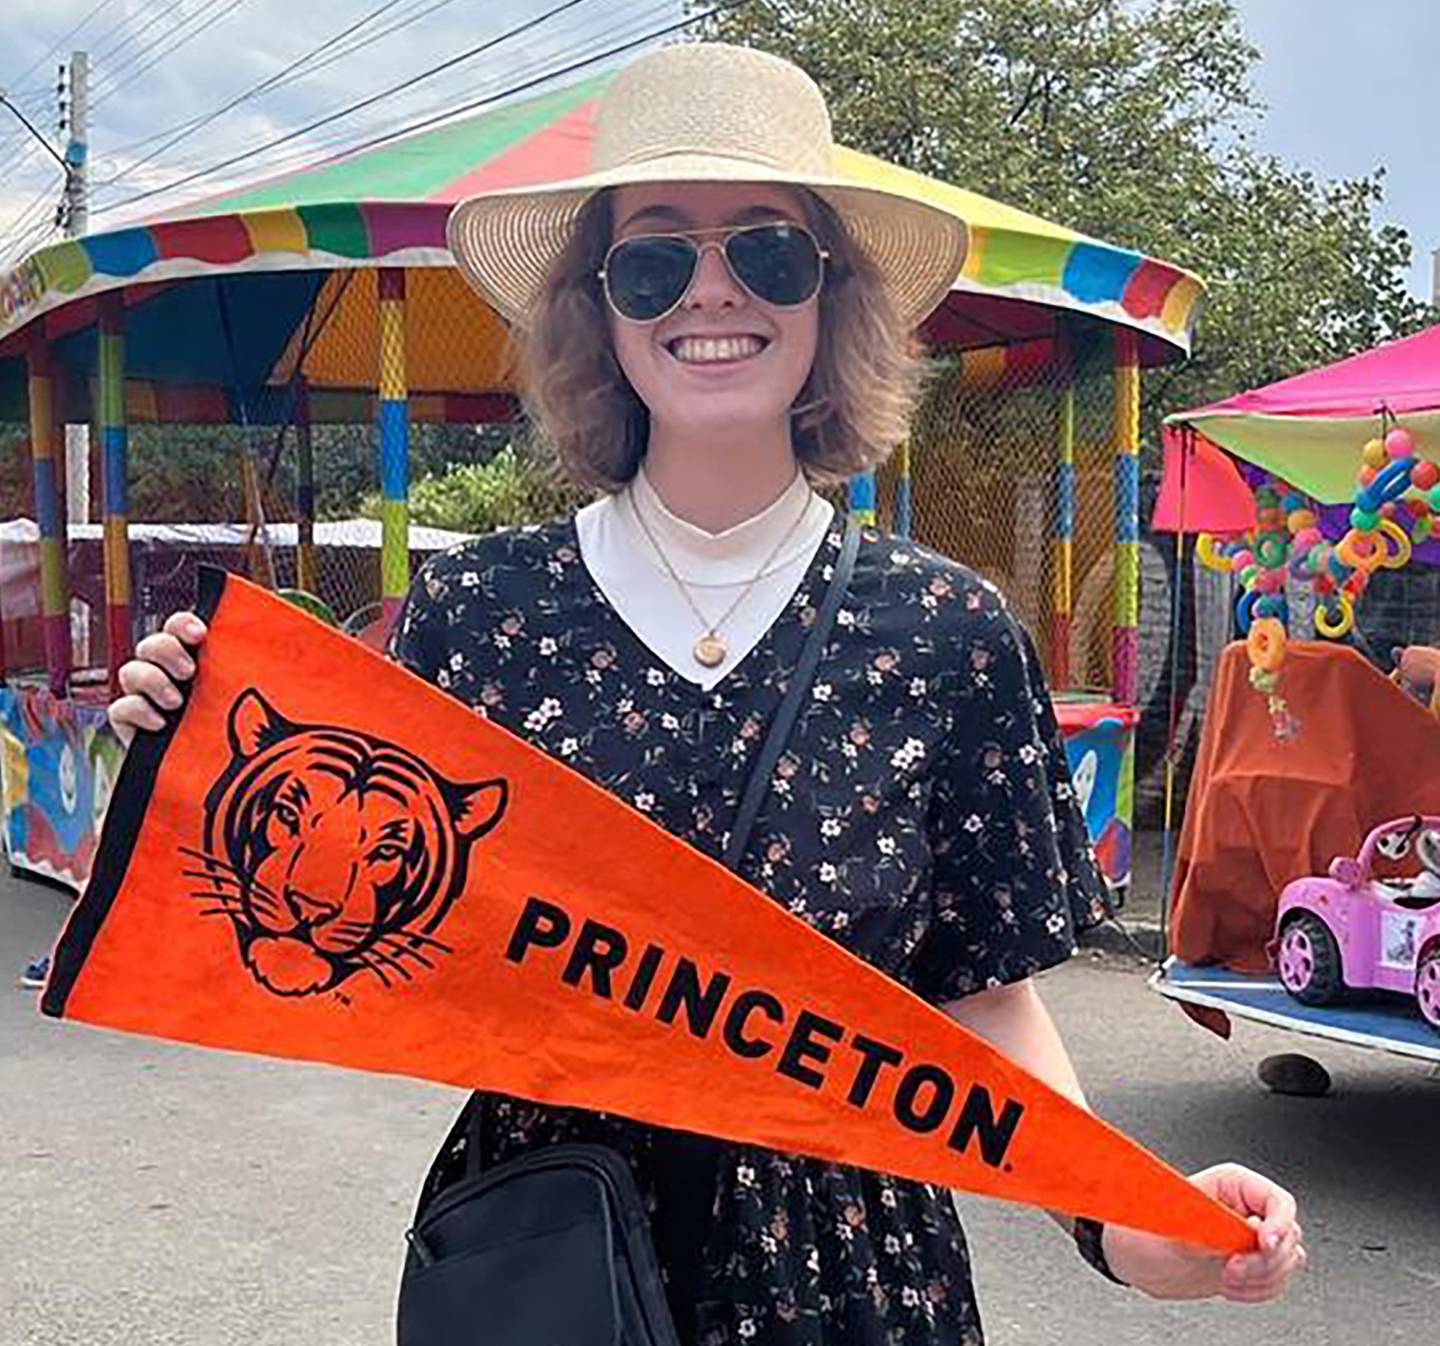 Student with a Princeton pennant